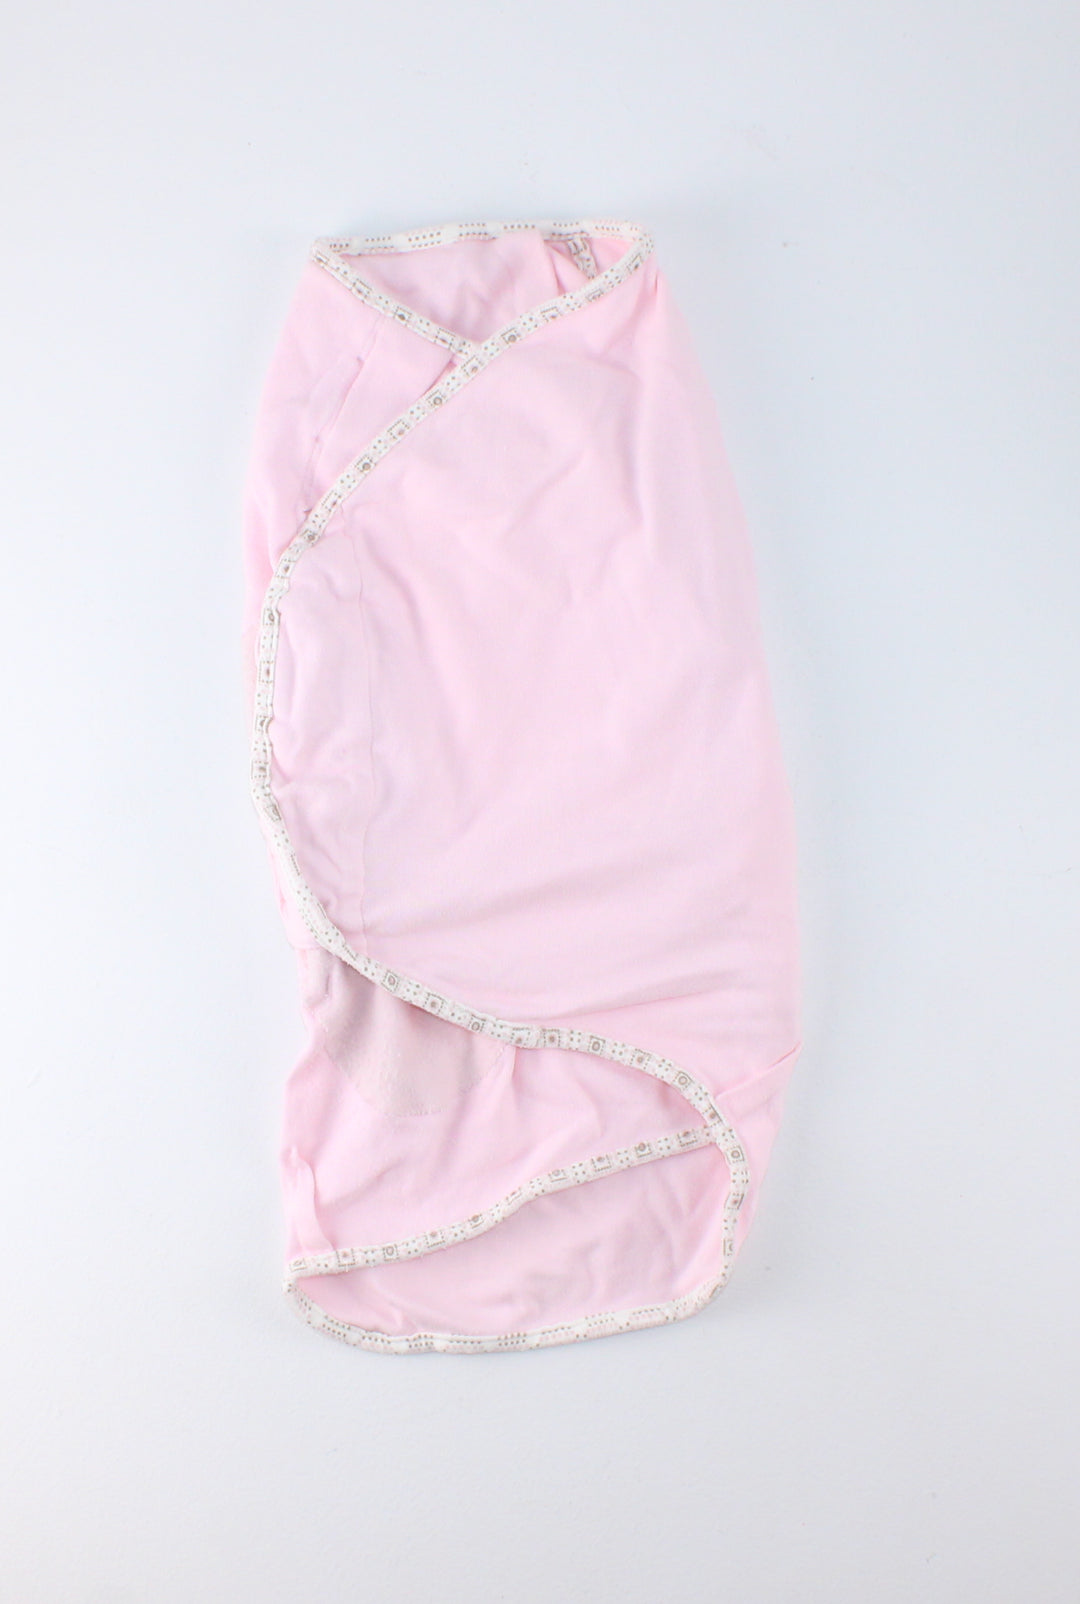 FIRST YEARS PINK SWADDLE BABY VGUC